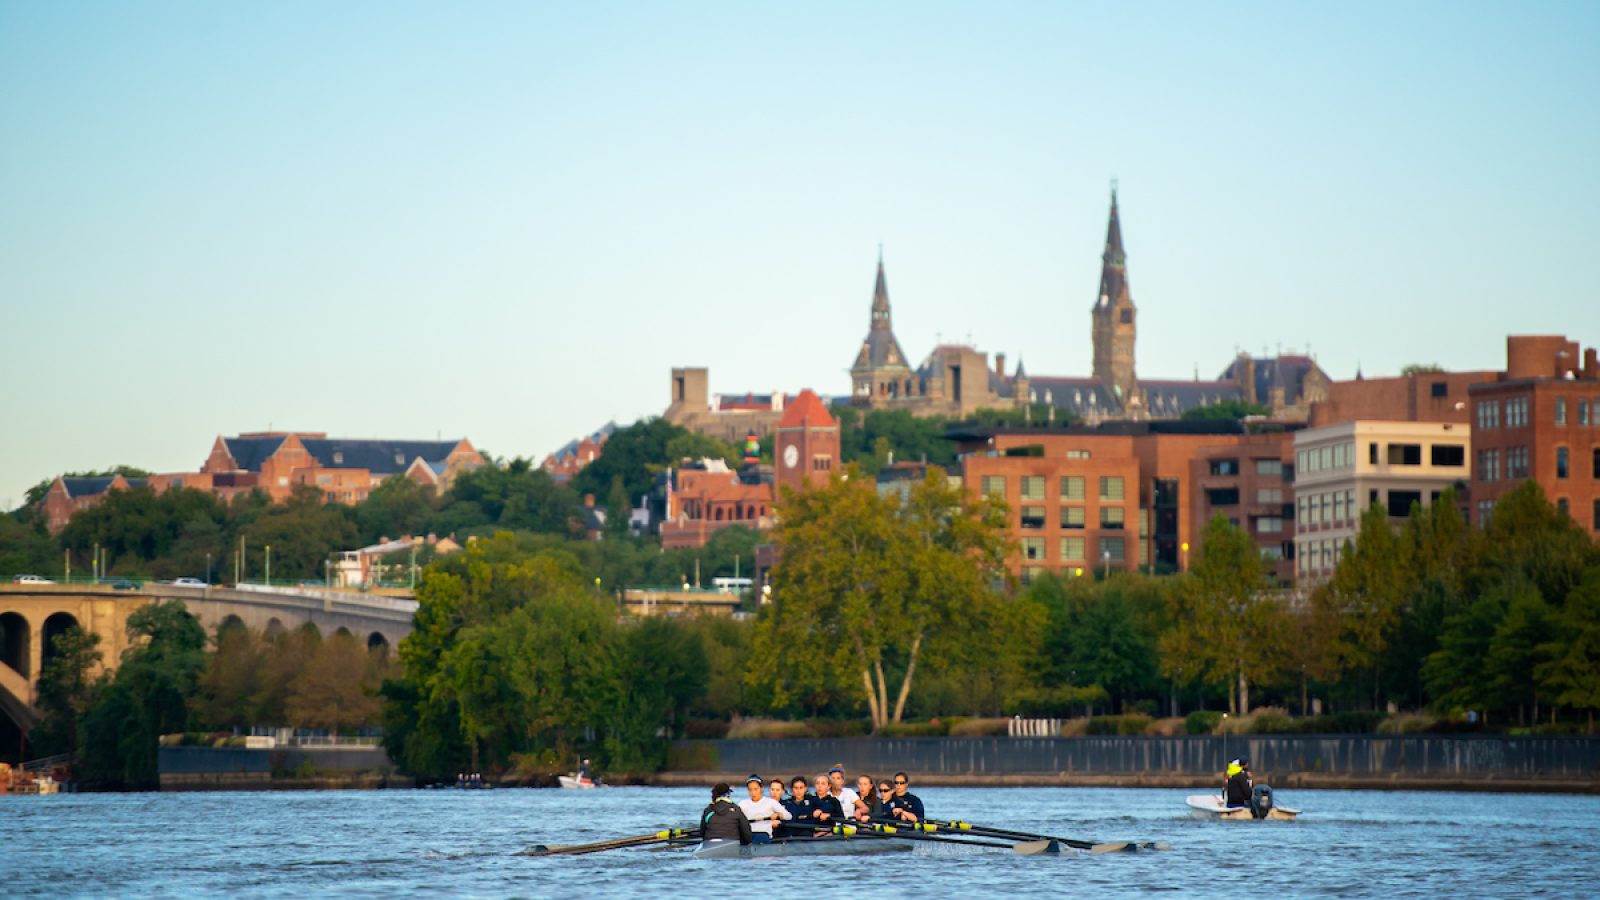 View of the Potomac River with crew boat on the water and skyline of Georgetown University